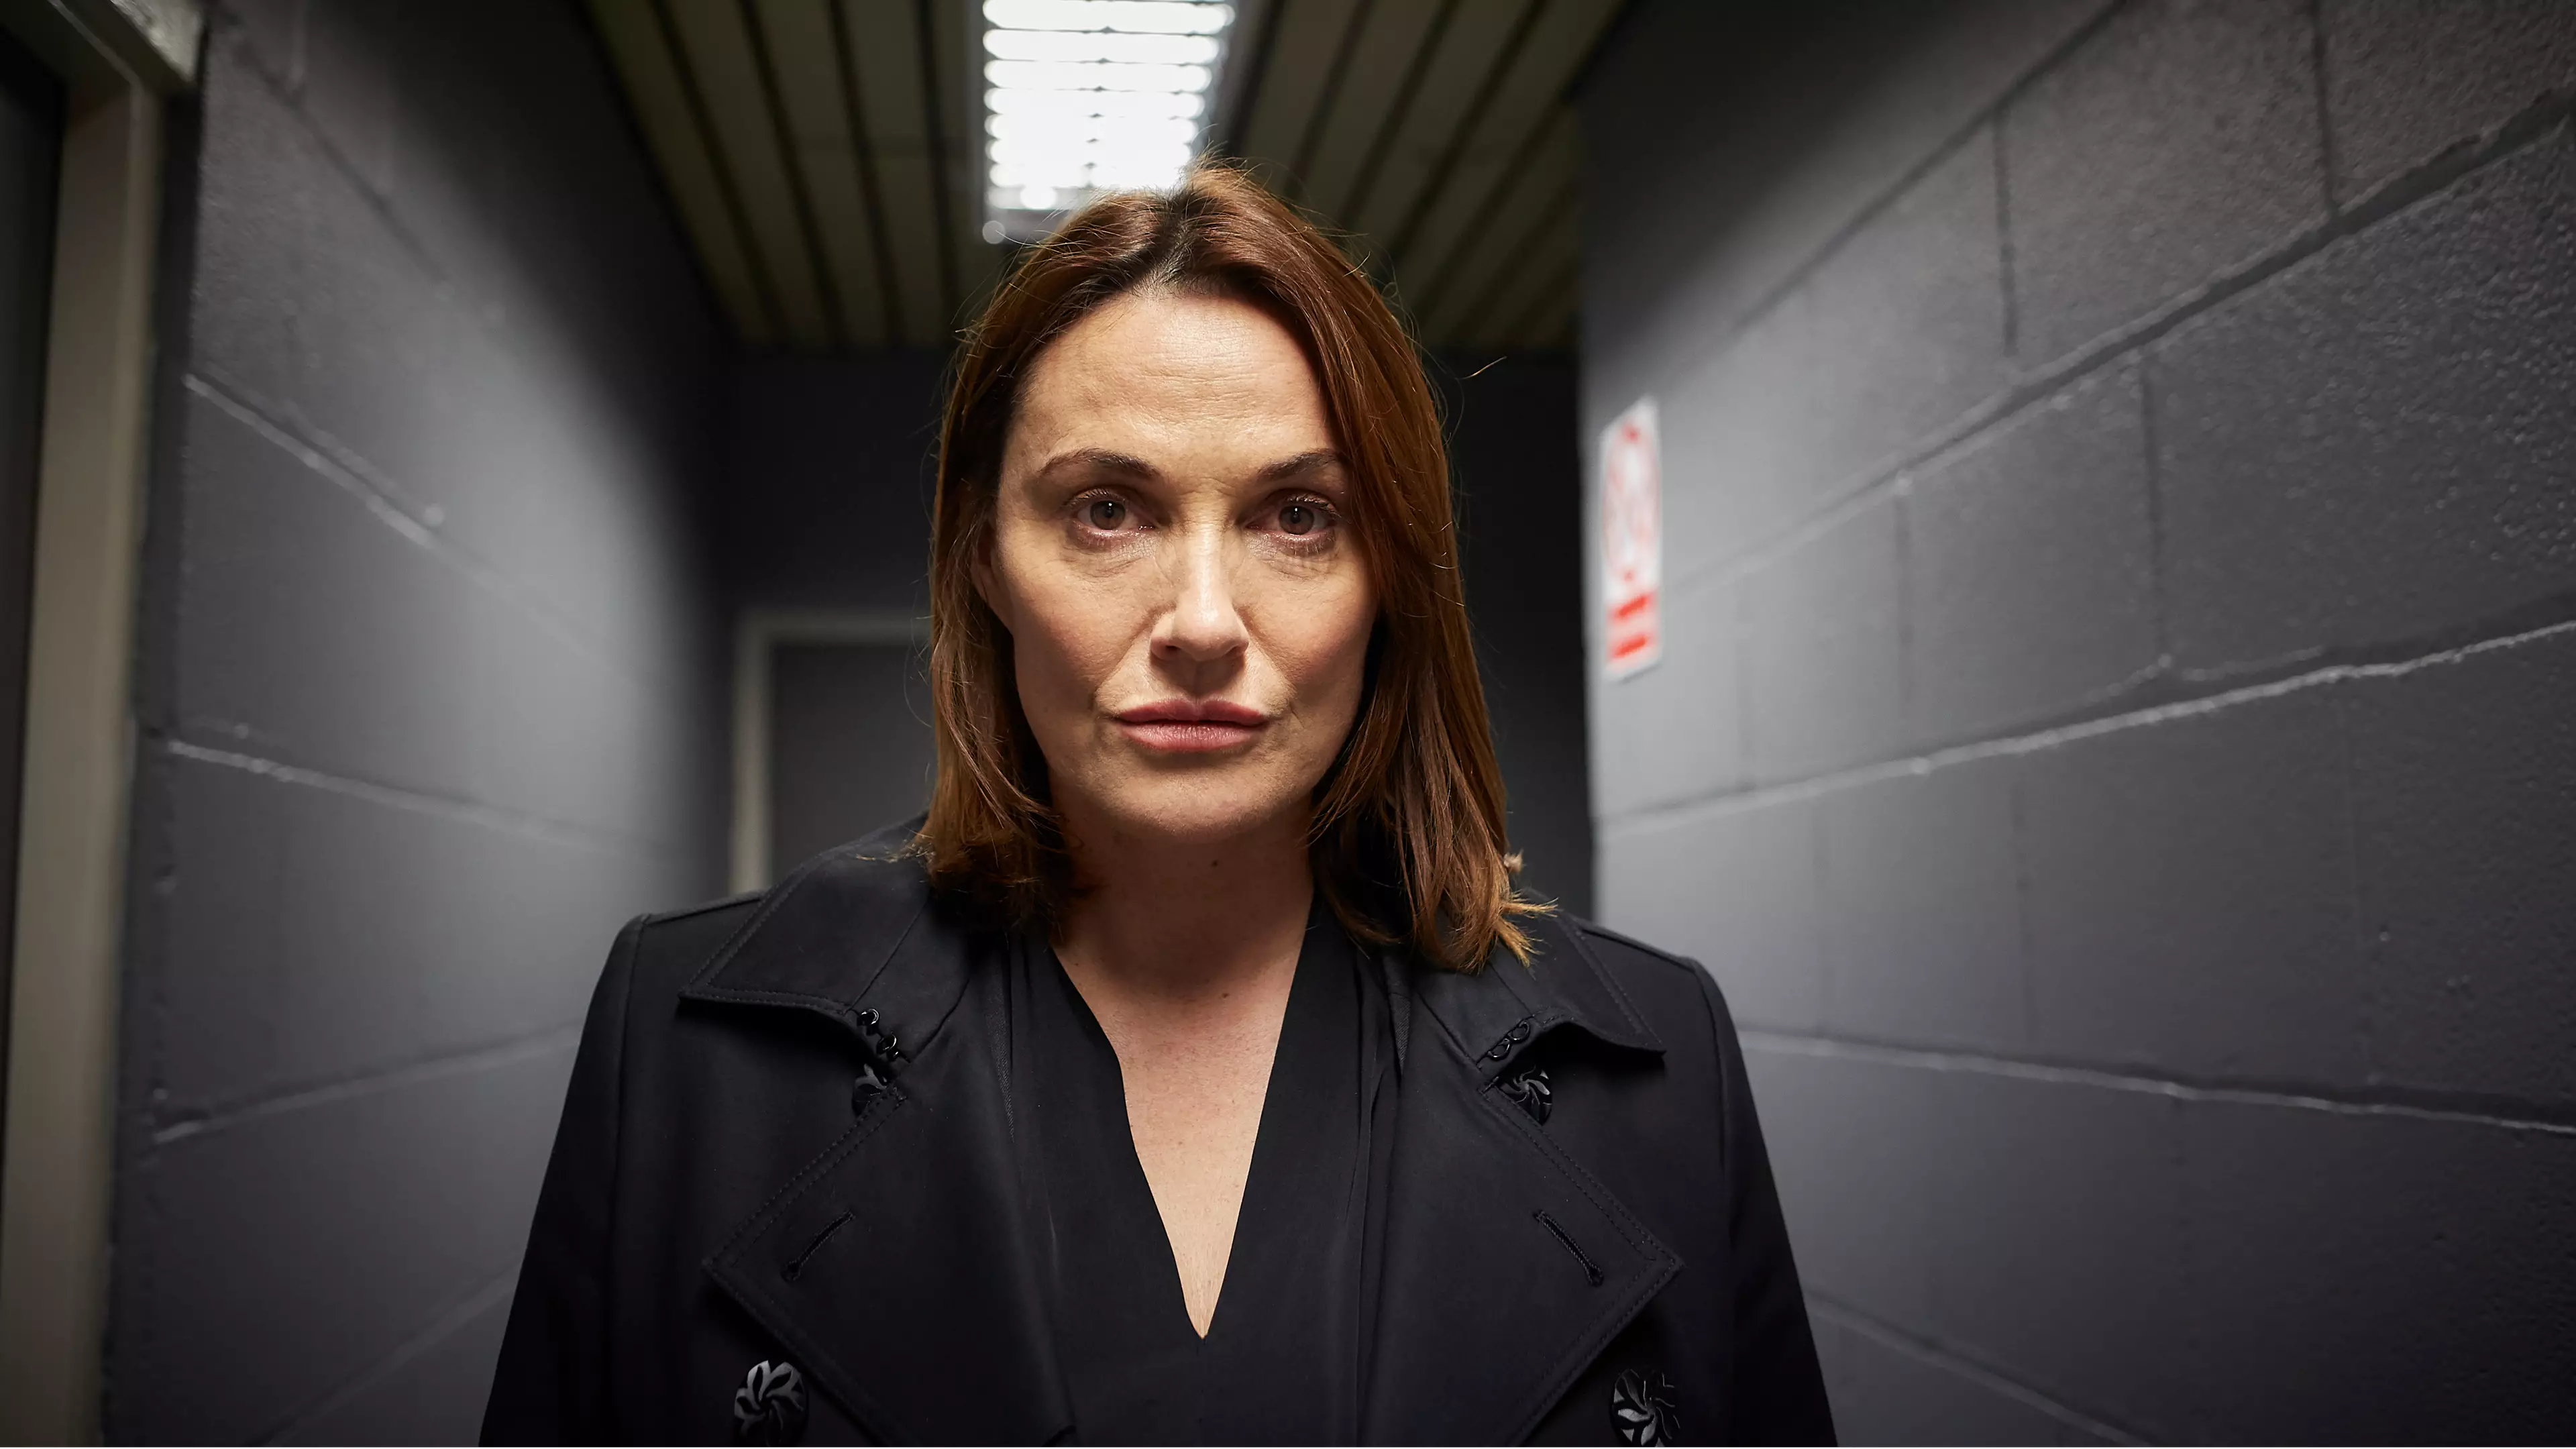 ITV Crime Drama 'Bancroft' Returns This Week And 'Marcella' Fans Will Love It